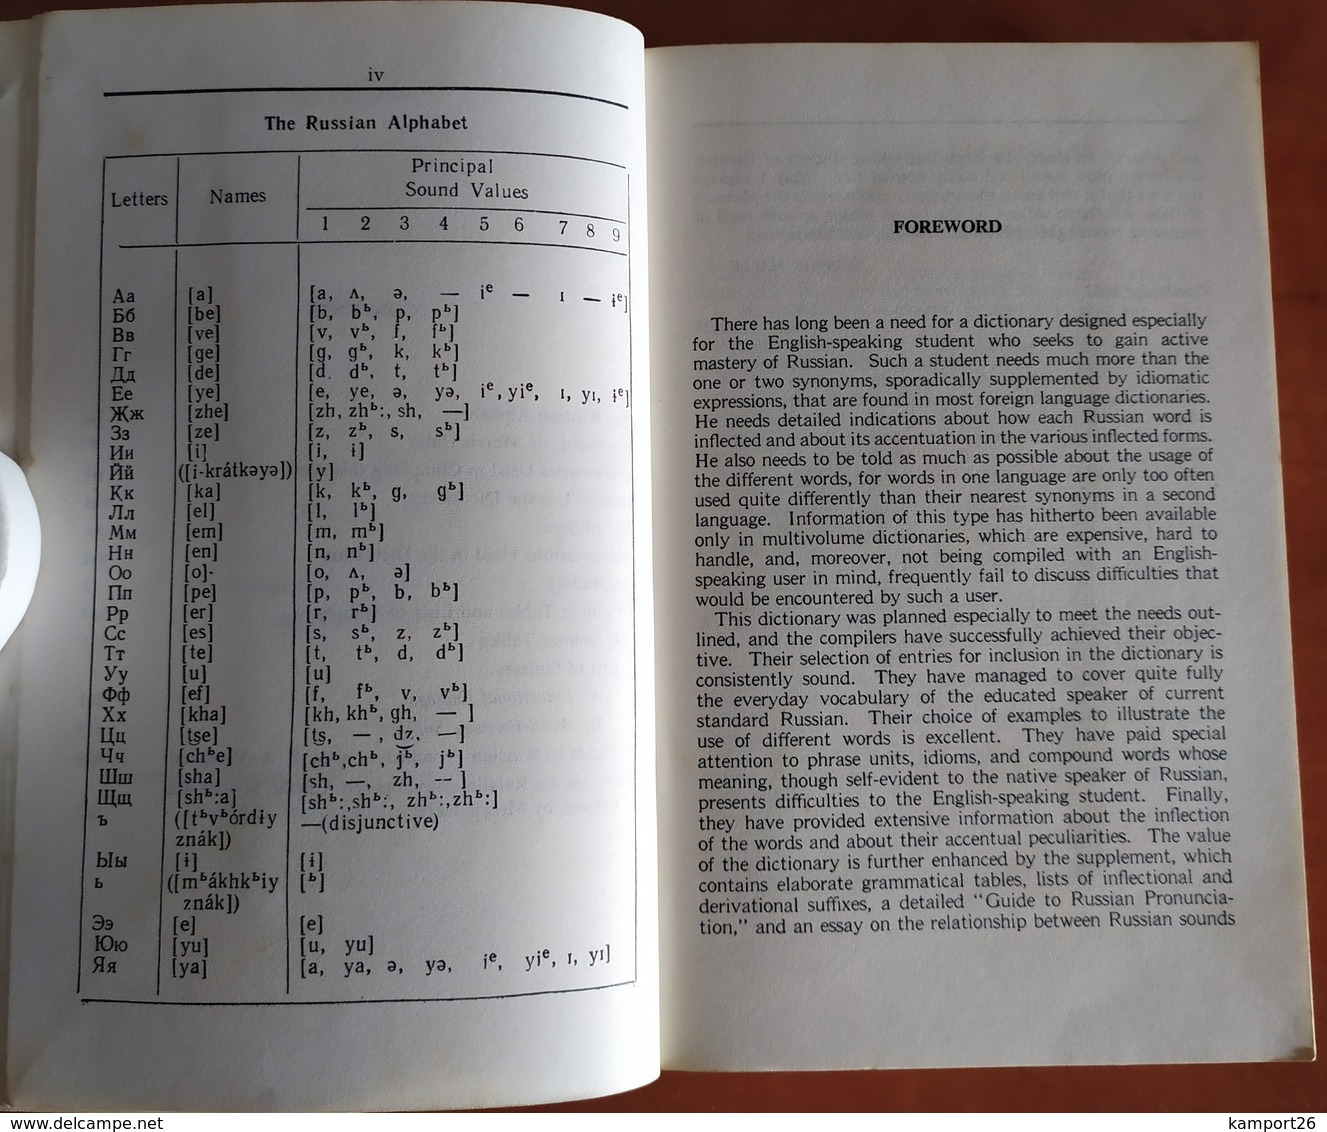 1963 The Leaner's RUSSIAN - ENGLISH DICTIONARY Russe - Anglais CAMBRIDGE - Éducation/ Enseignement